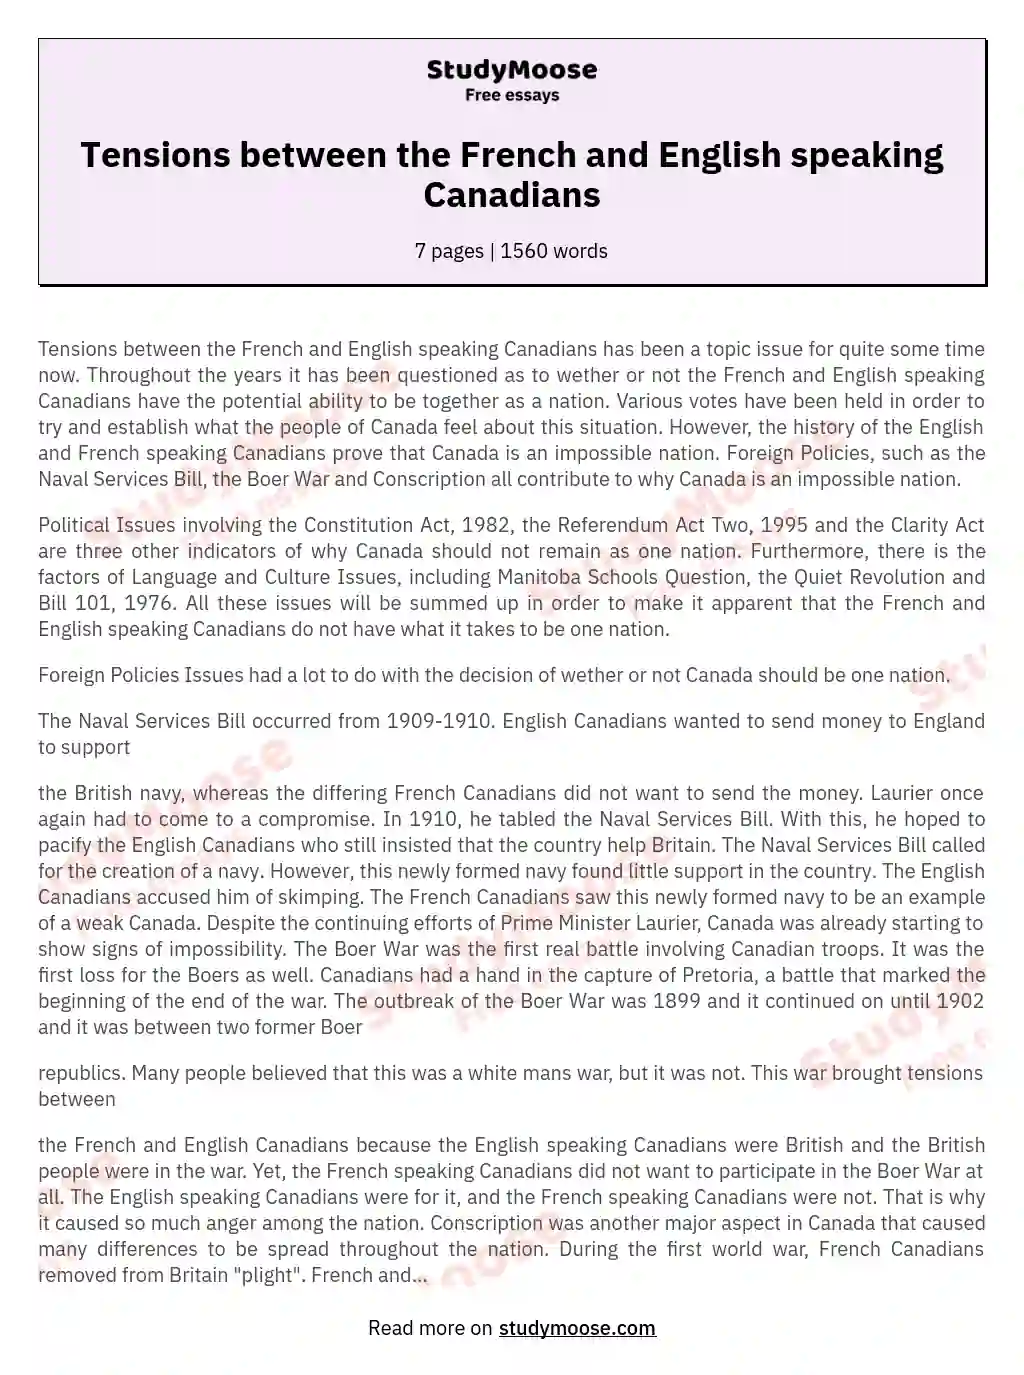 Tensions between the French and English speaking Canadians essay